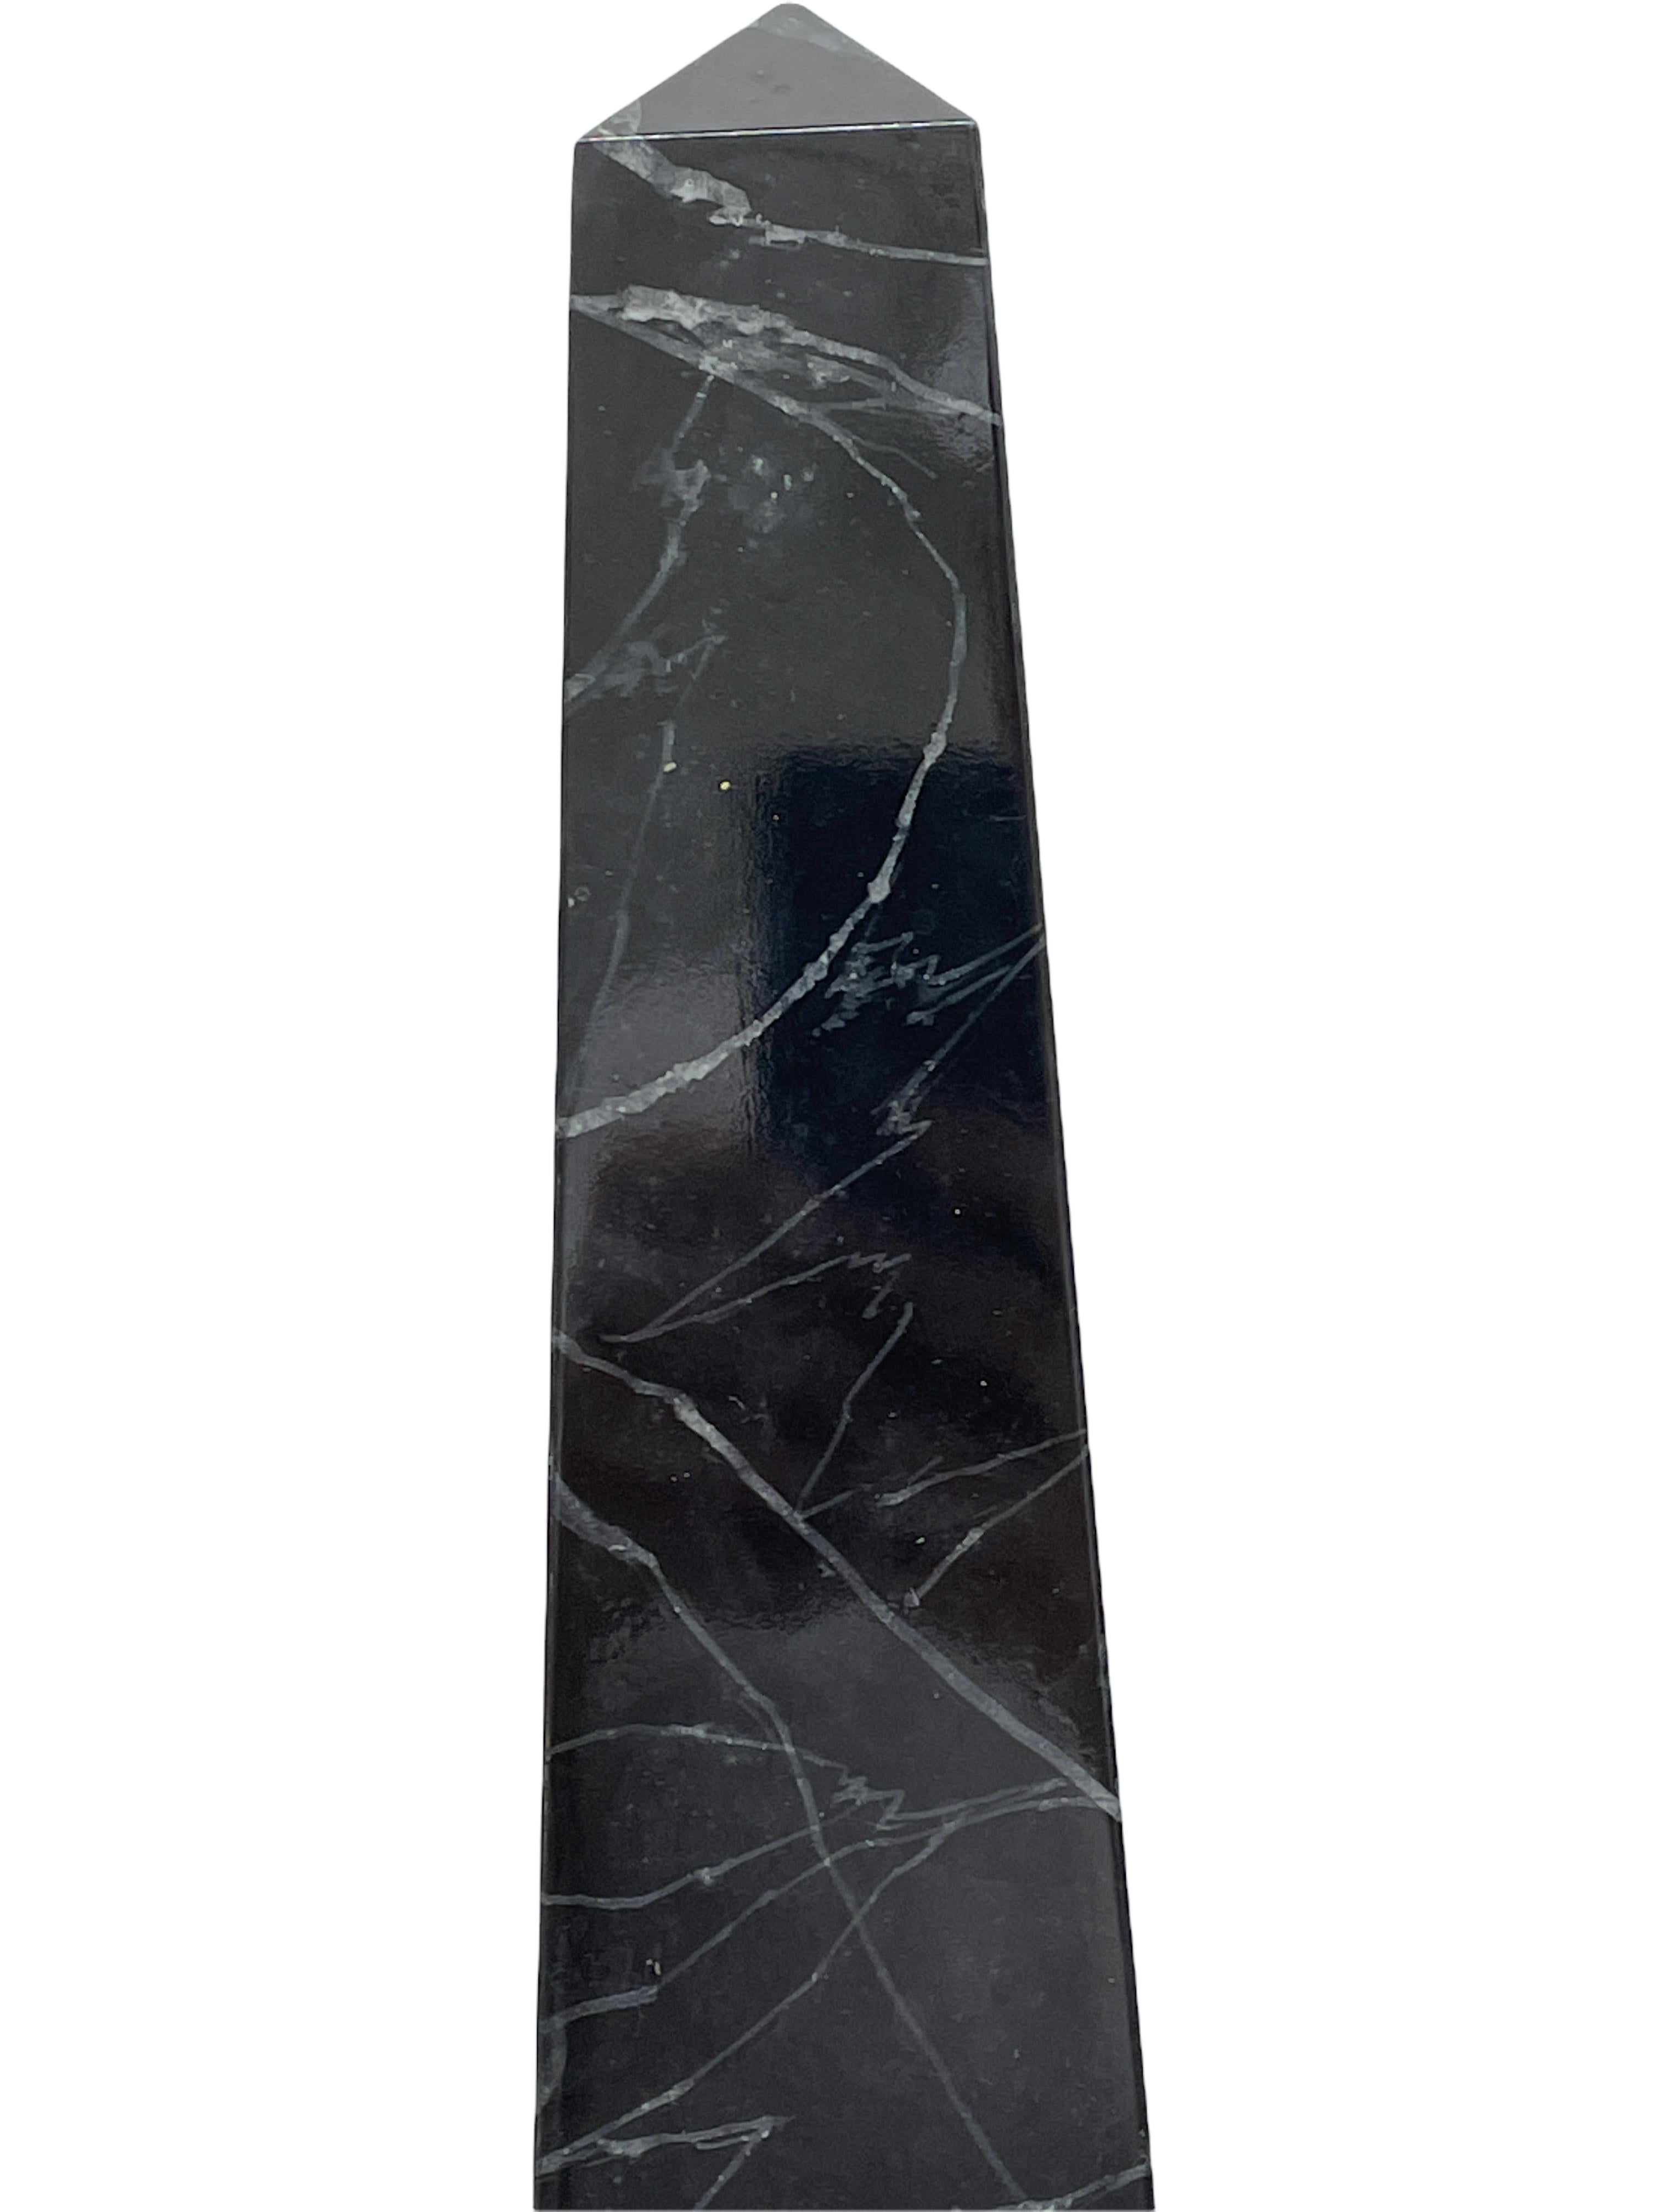 20th Century Obelisk Sculpture Marbled Wood, Black and White, Antique Austria 1900s For Sale